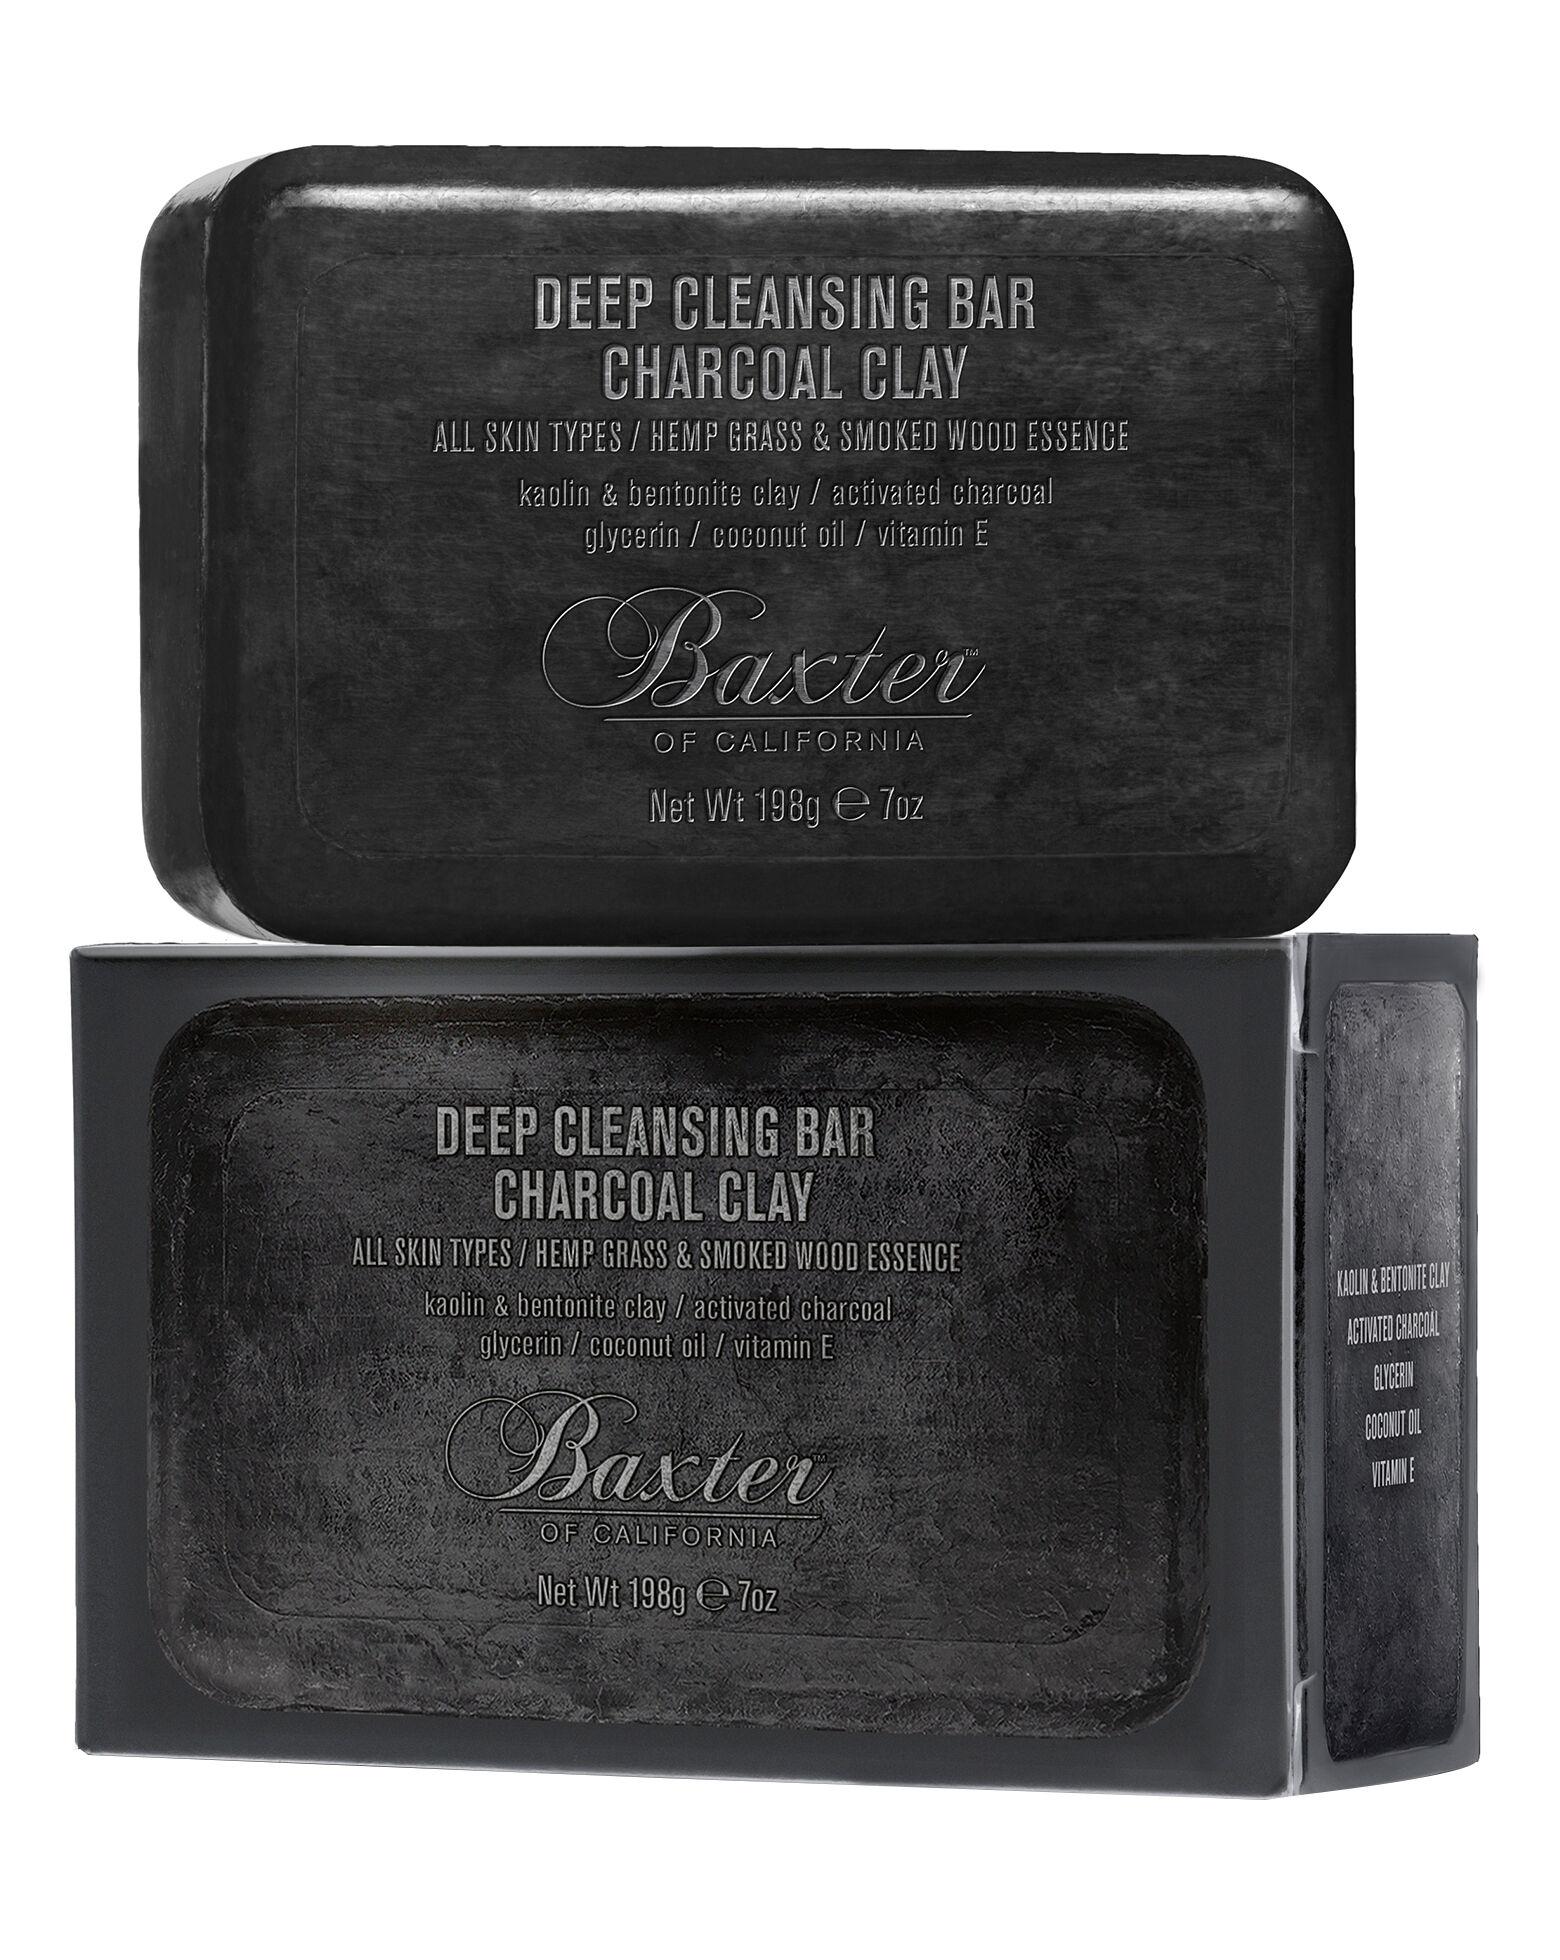 Baxter of California - Charcoal Clay Deep Cleansing Bar